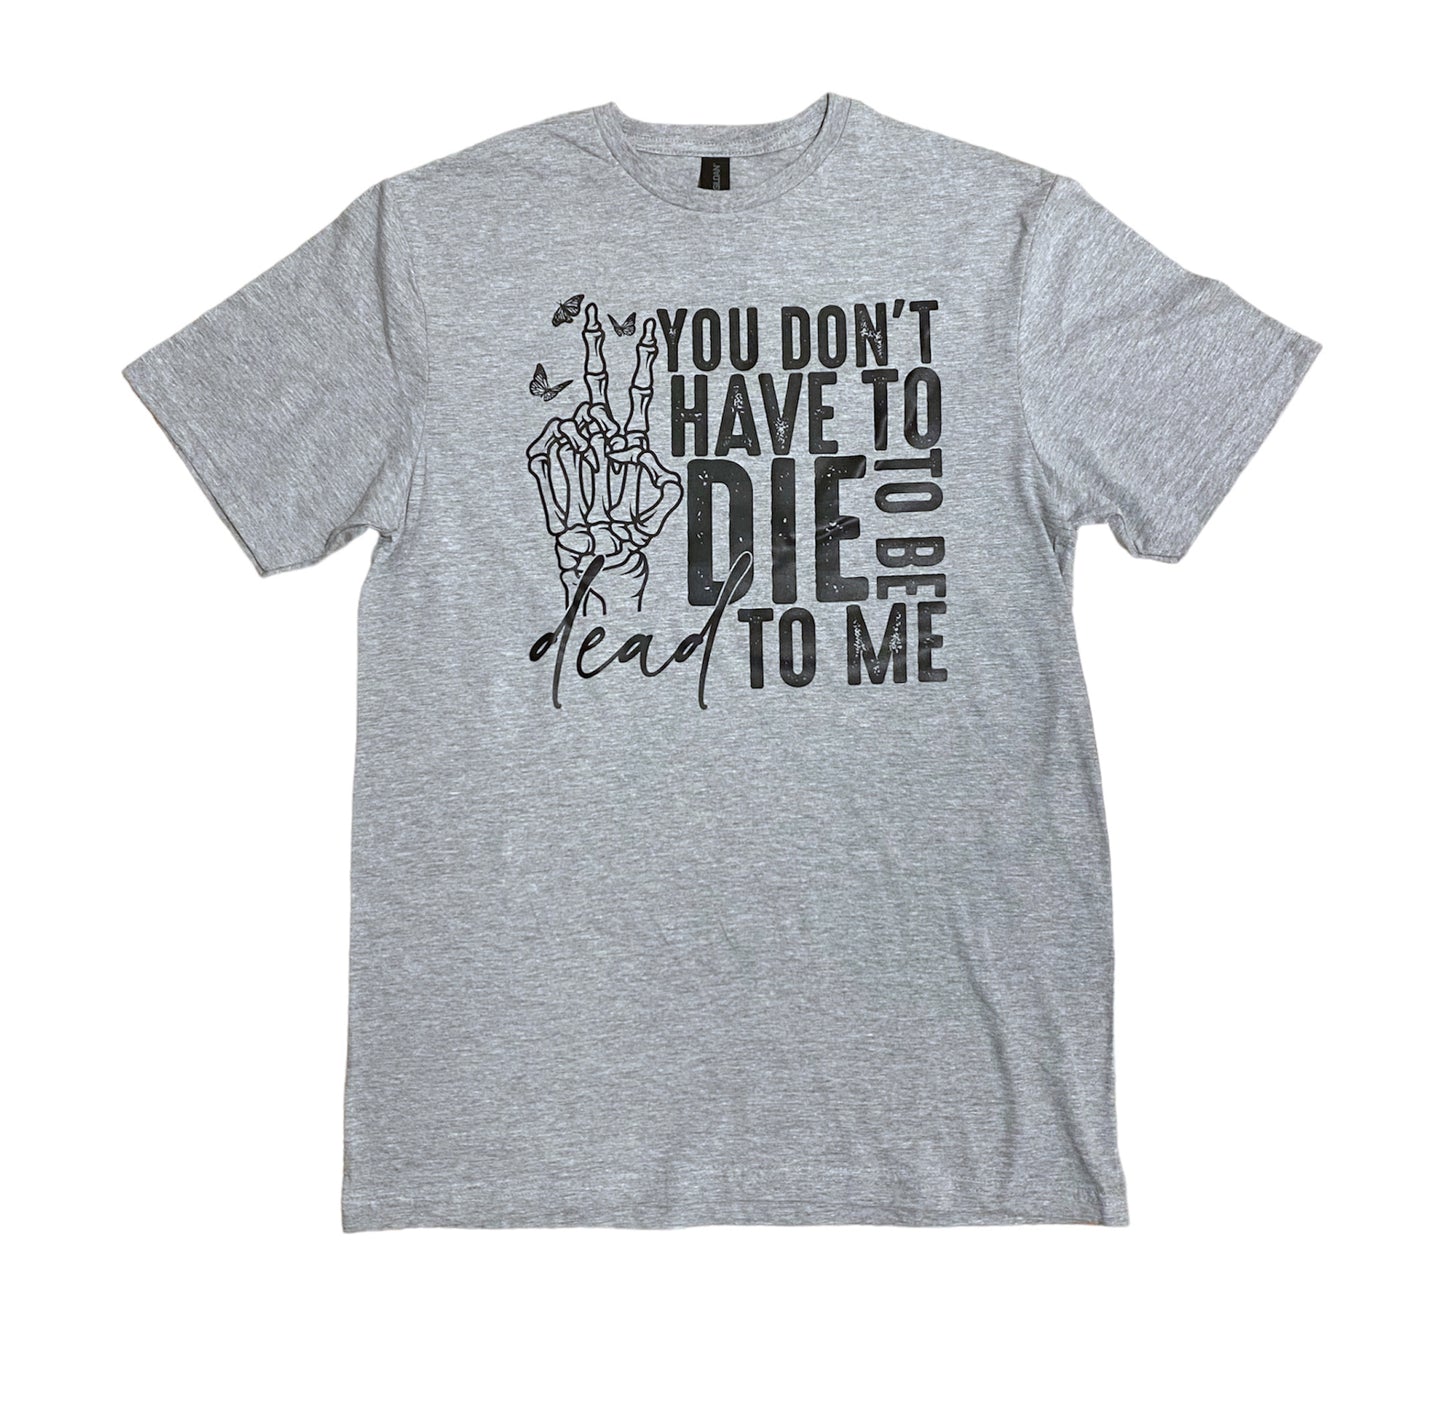 You don’t have to die to be dead to me tshirt